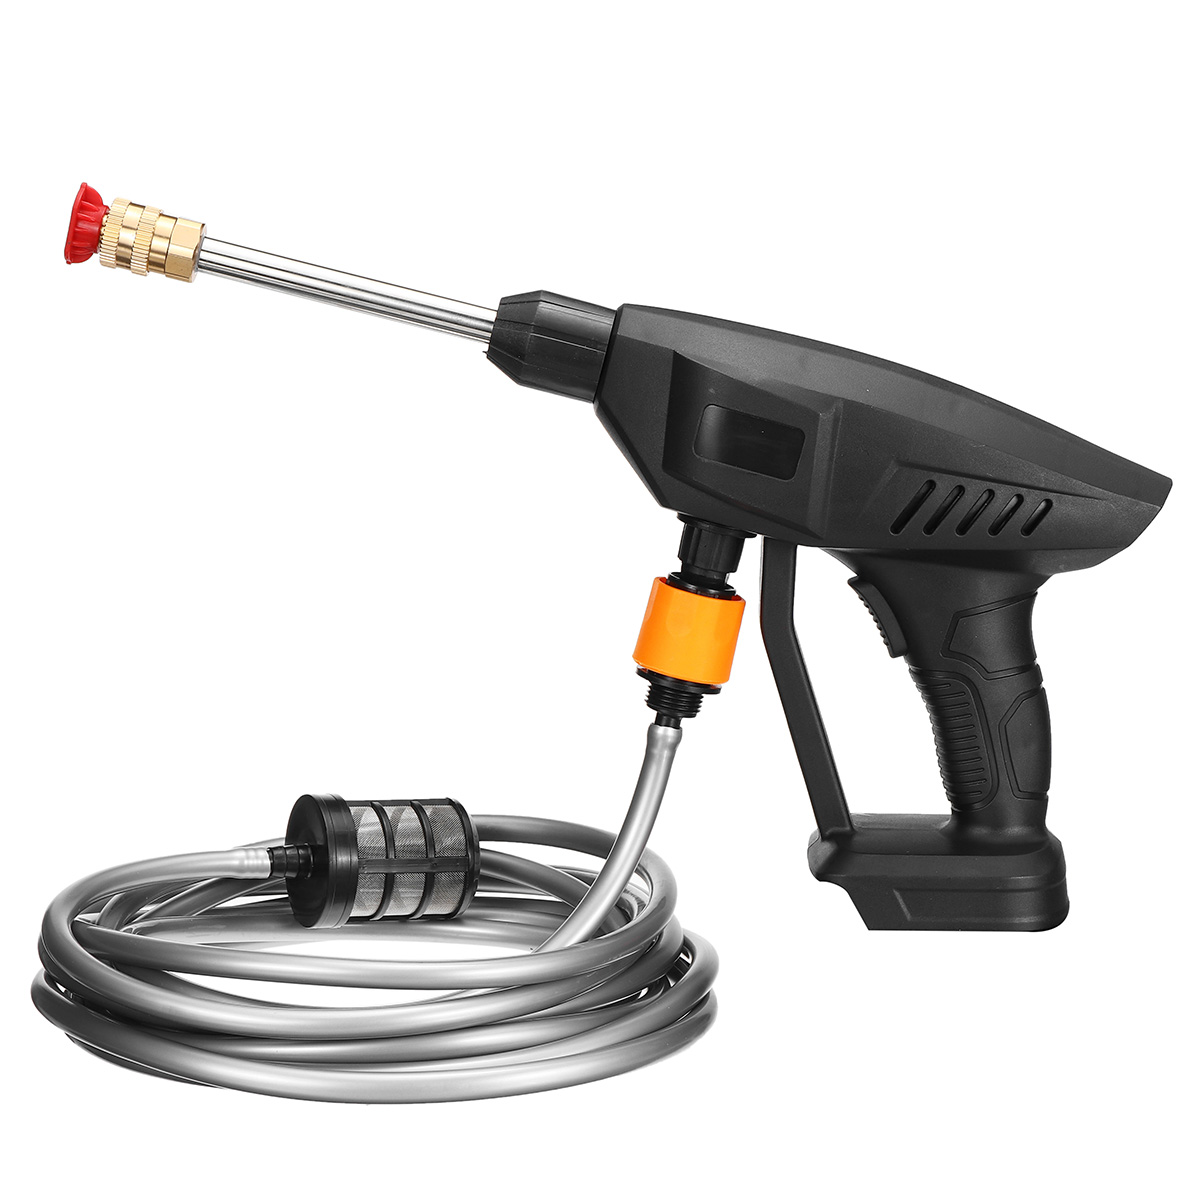 388VF High-pressure Water Pump Car Waher Guns Portable Cordless Electric Sprayer Cleaner Tools